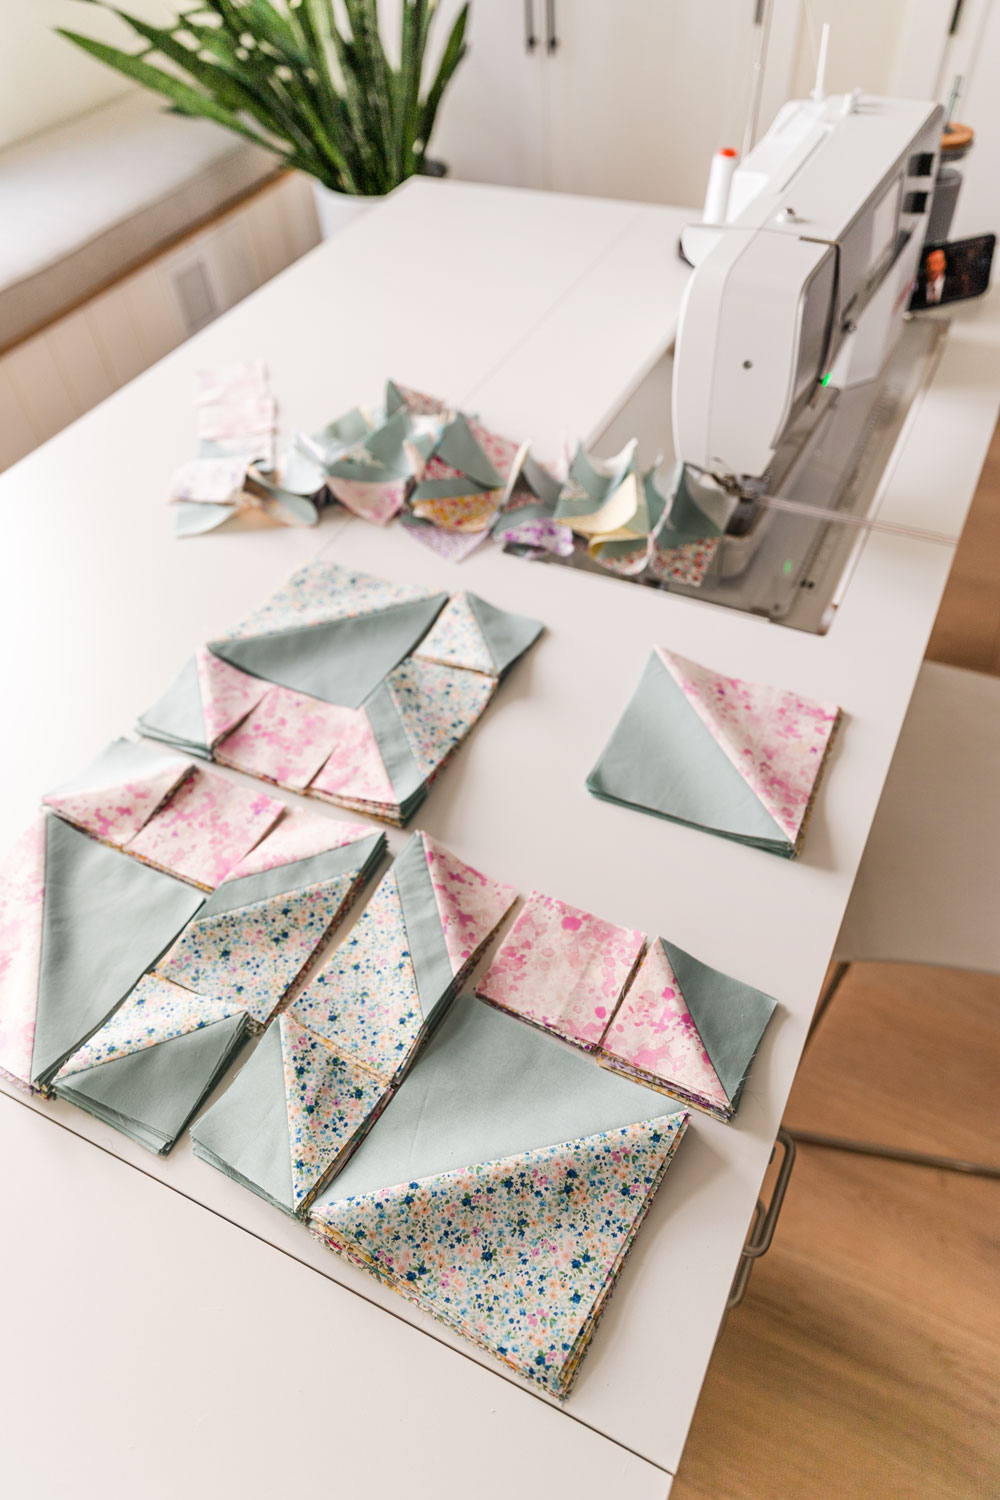 In Weeks 4 and 5 of the Holiday Party sew along we assemble our quilt blocks. Check out these extra tips and troubleshooting help! suzyquilts.com #sewalong #quilting